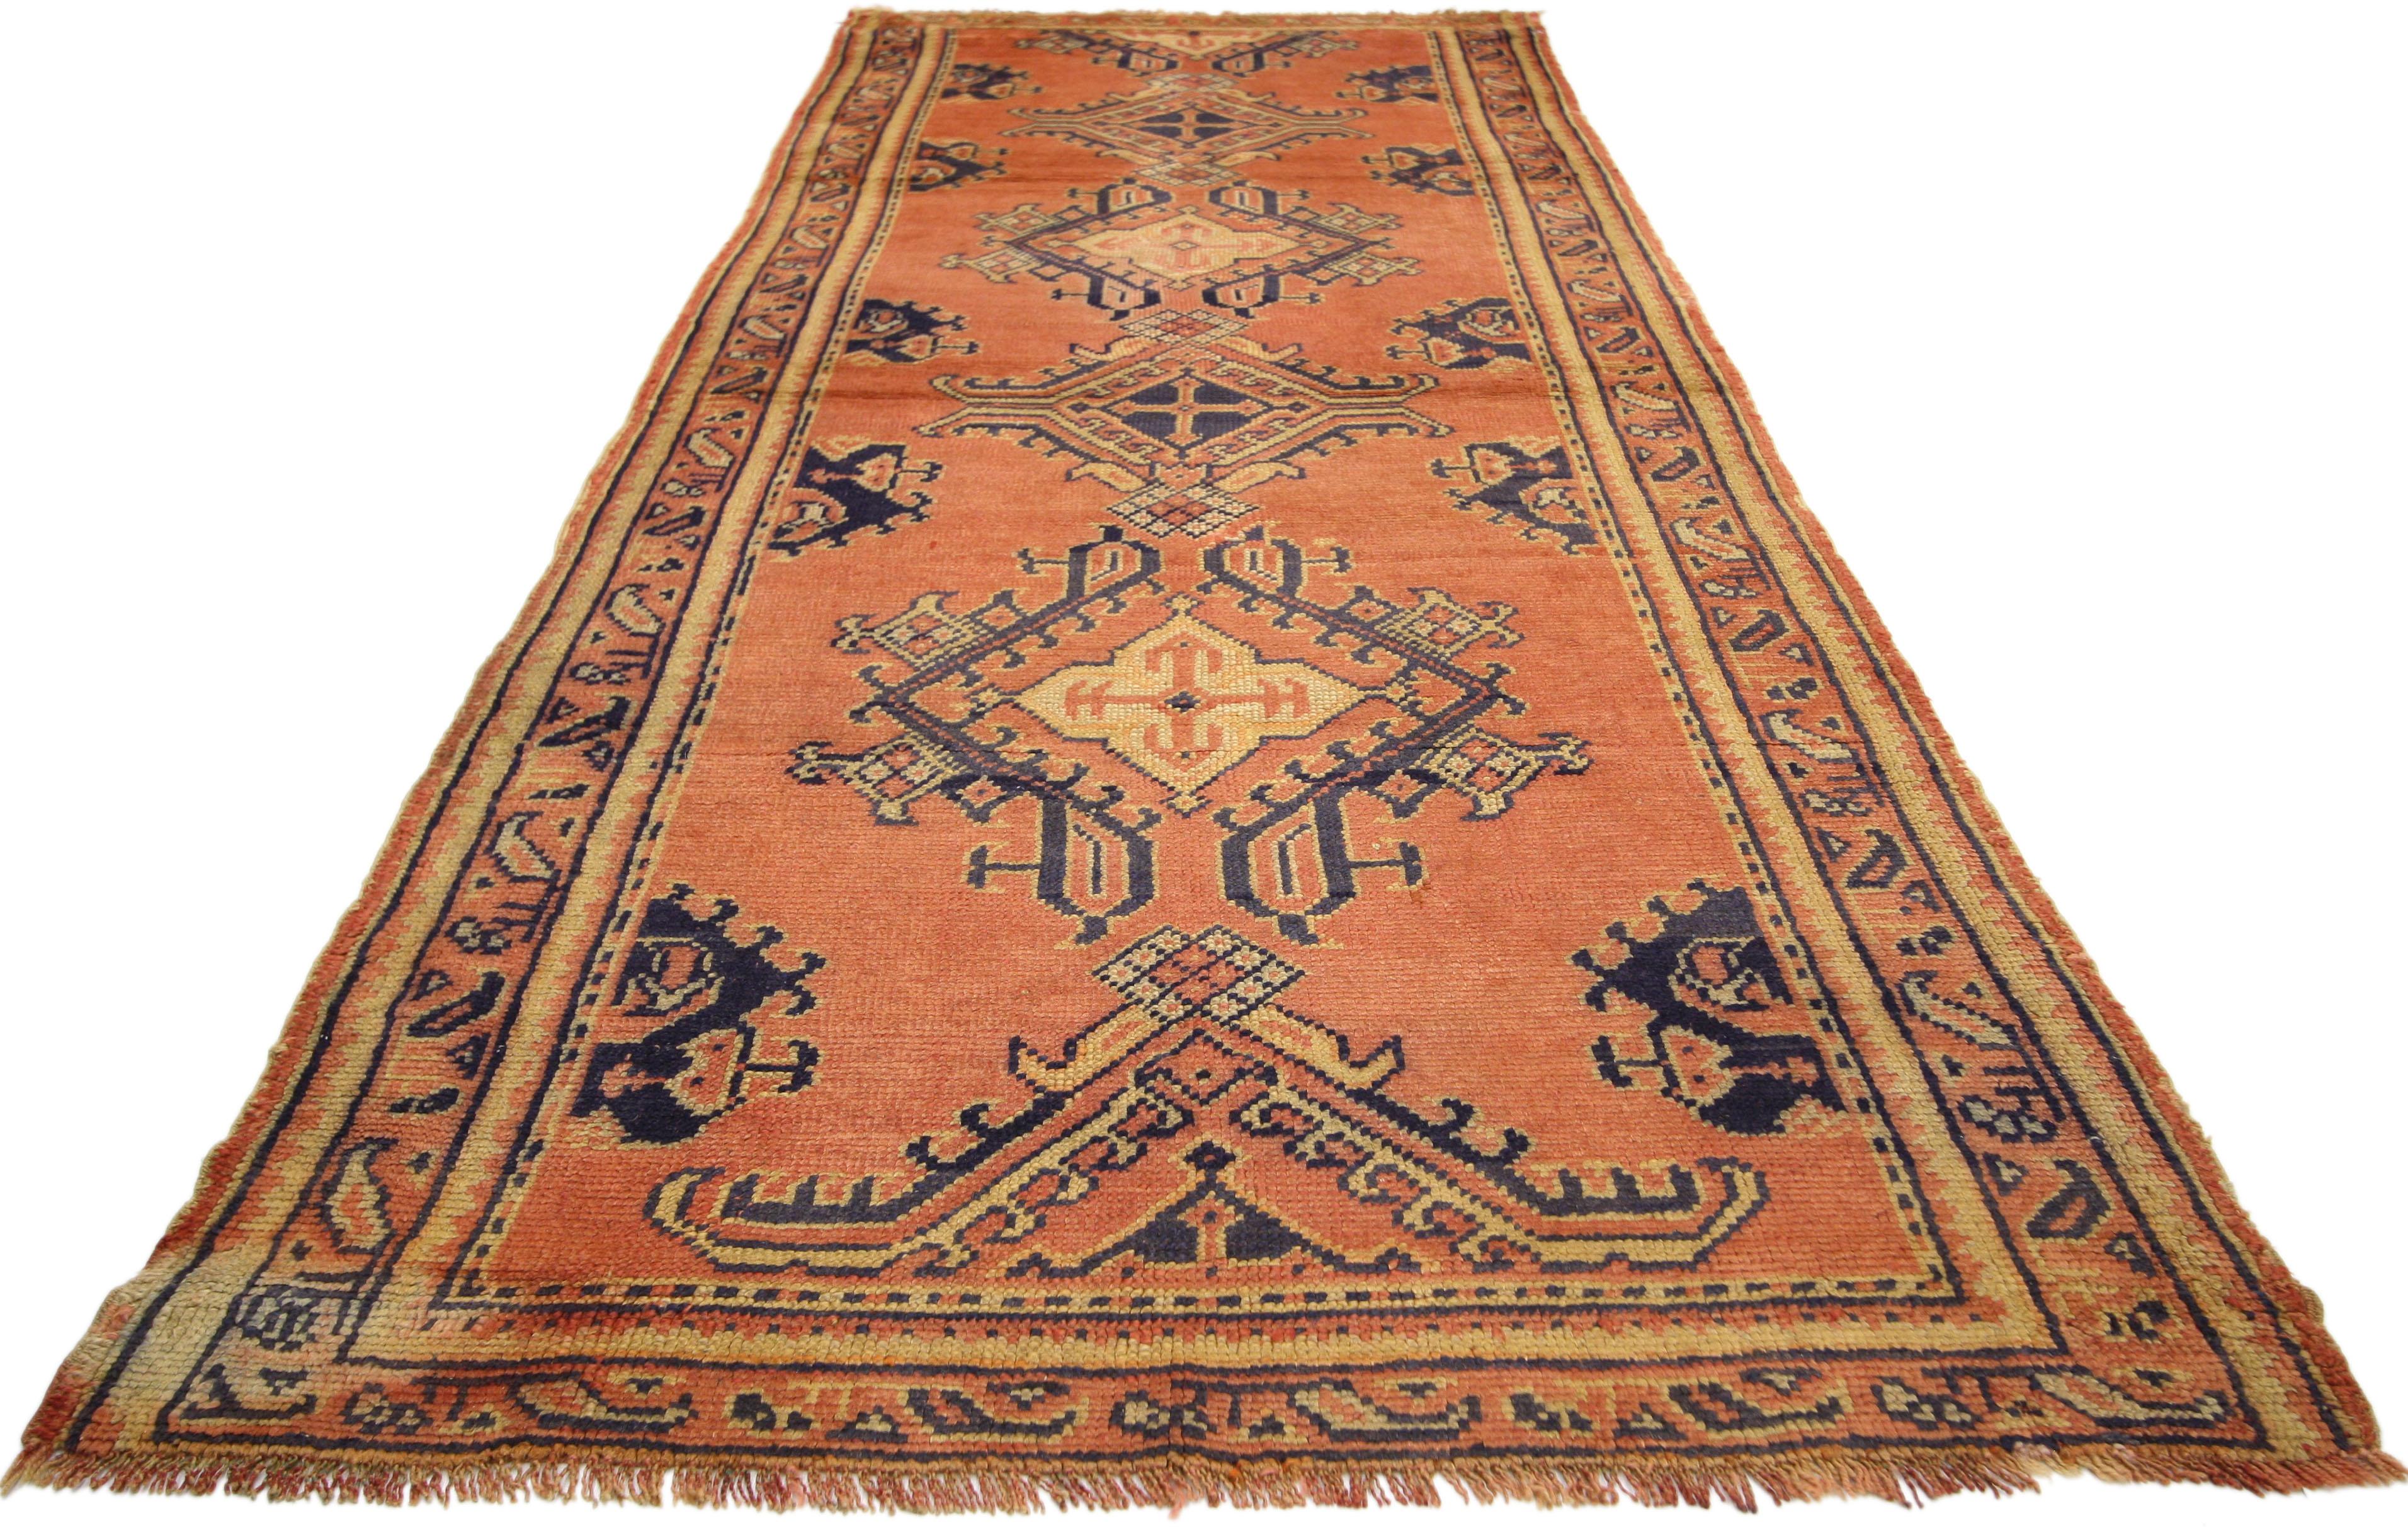 Vintage Turkish Oushak Runner with Eclectic Northwestern Style, Hallway Runner In Good Condition For Sale In Dallas, TX